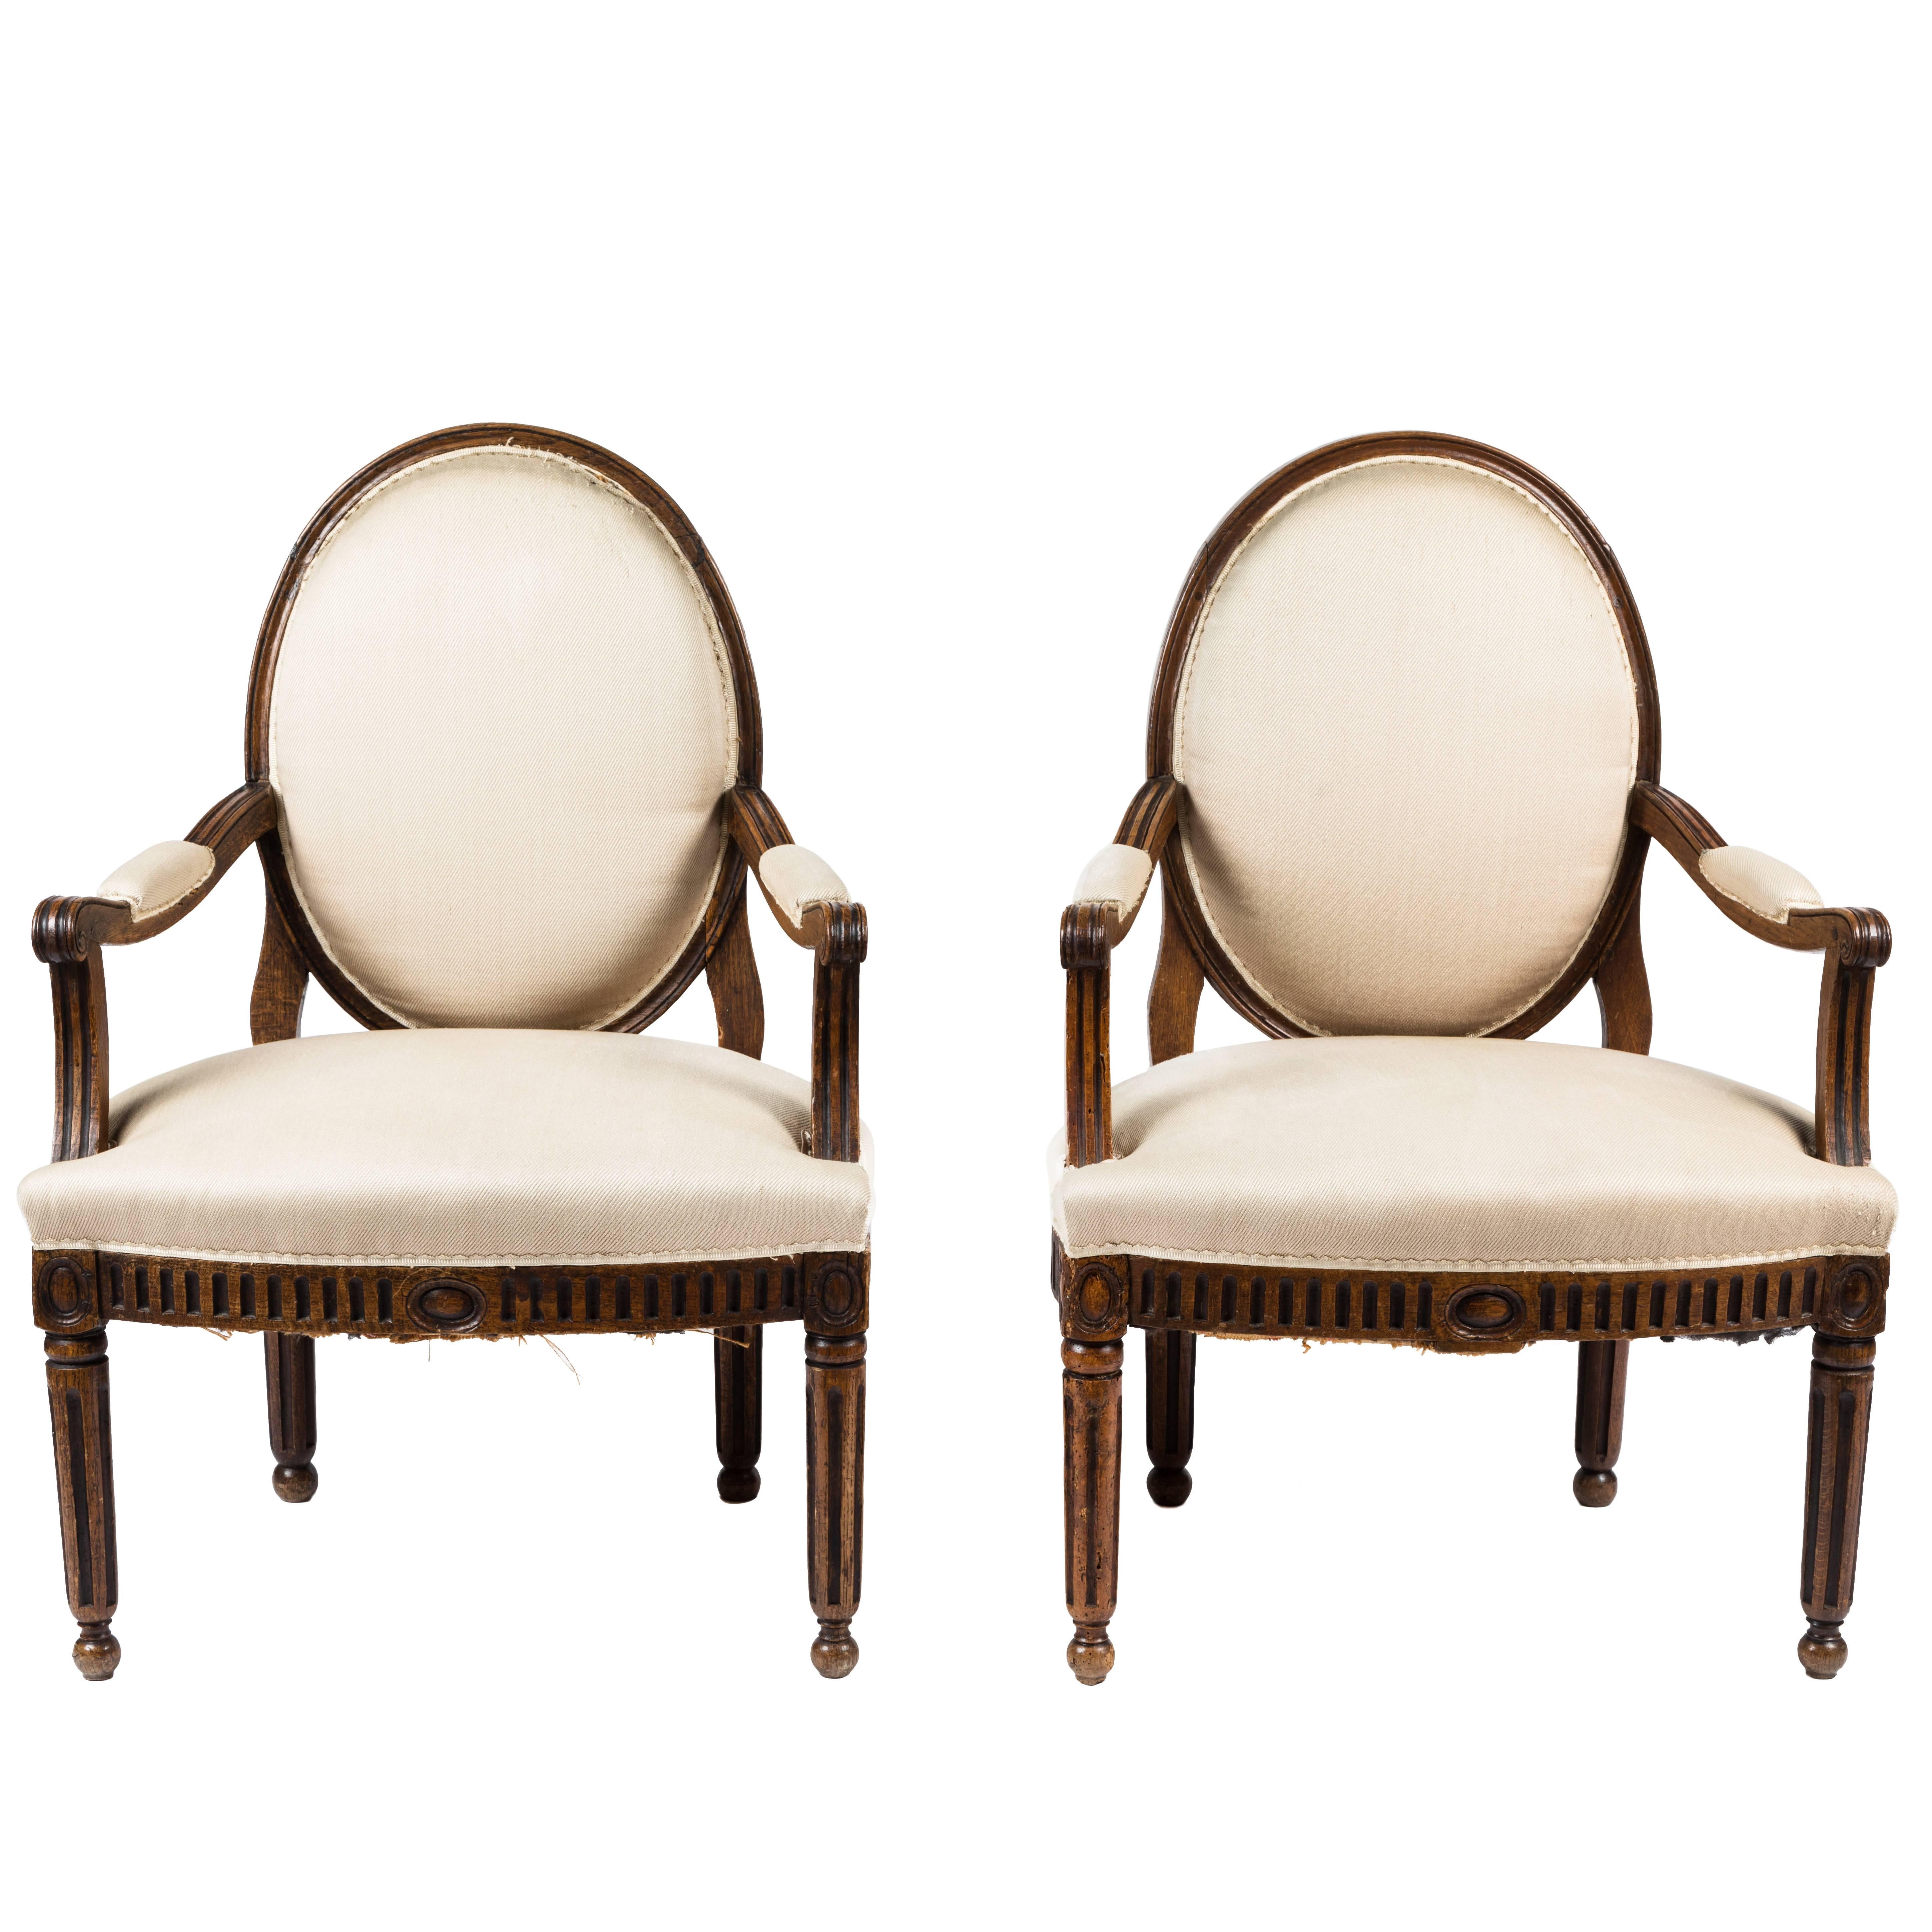 Pair of Antique Italian Neoclassical Style Armchairs For Sale